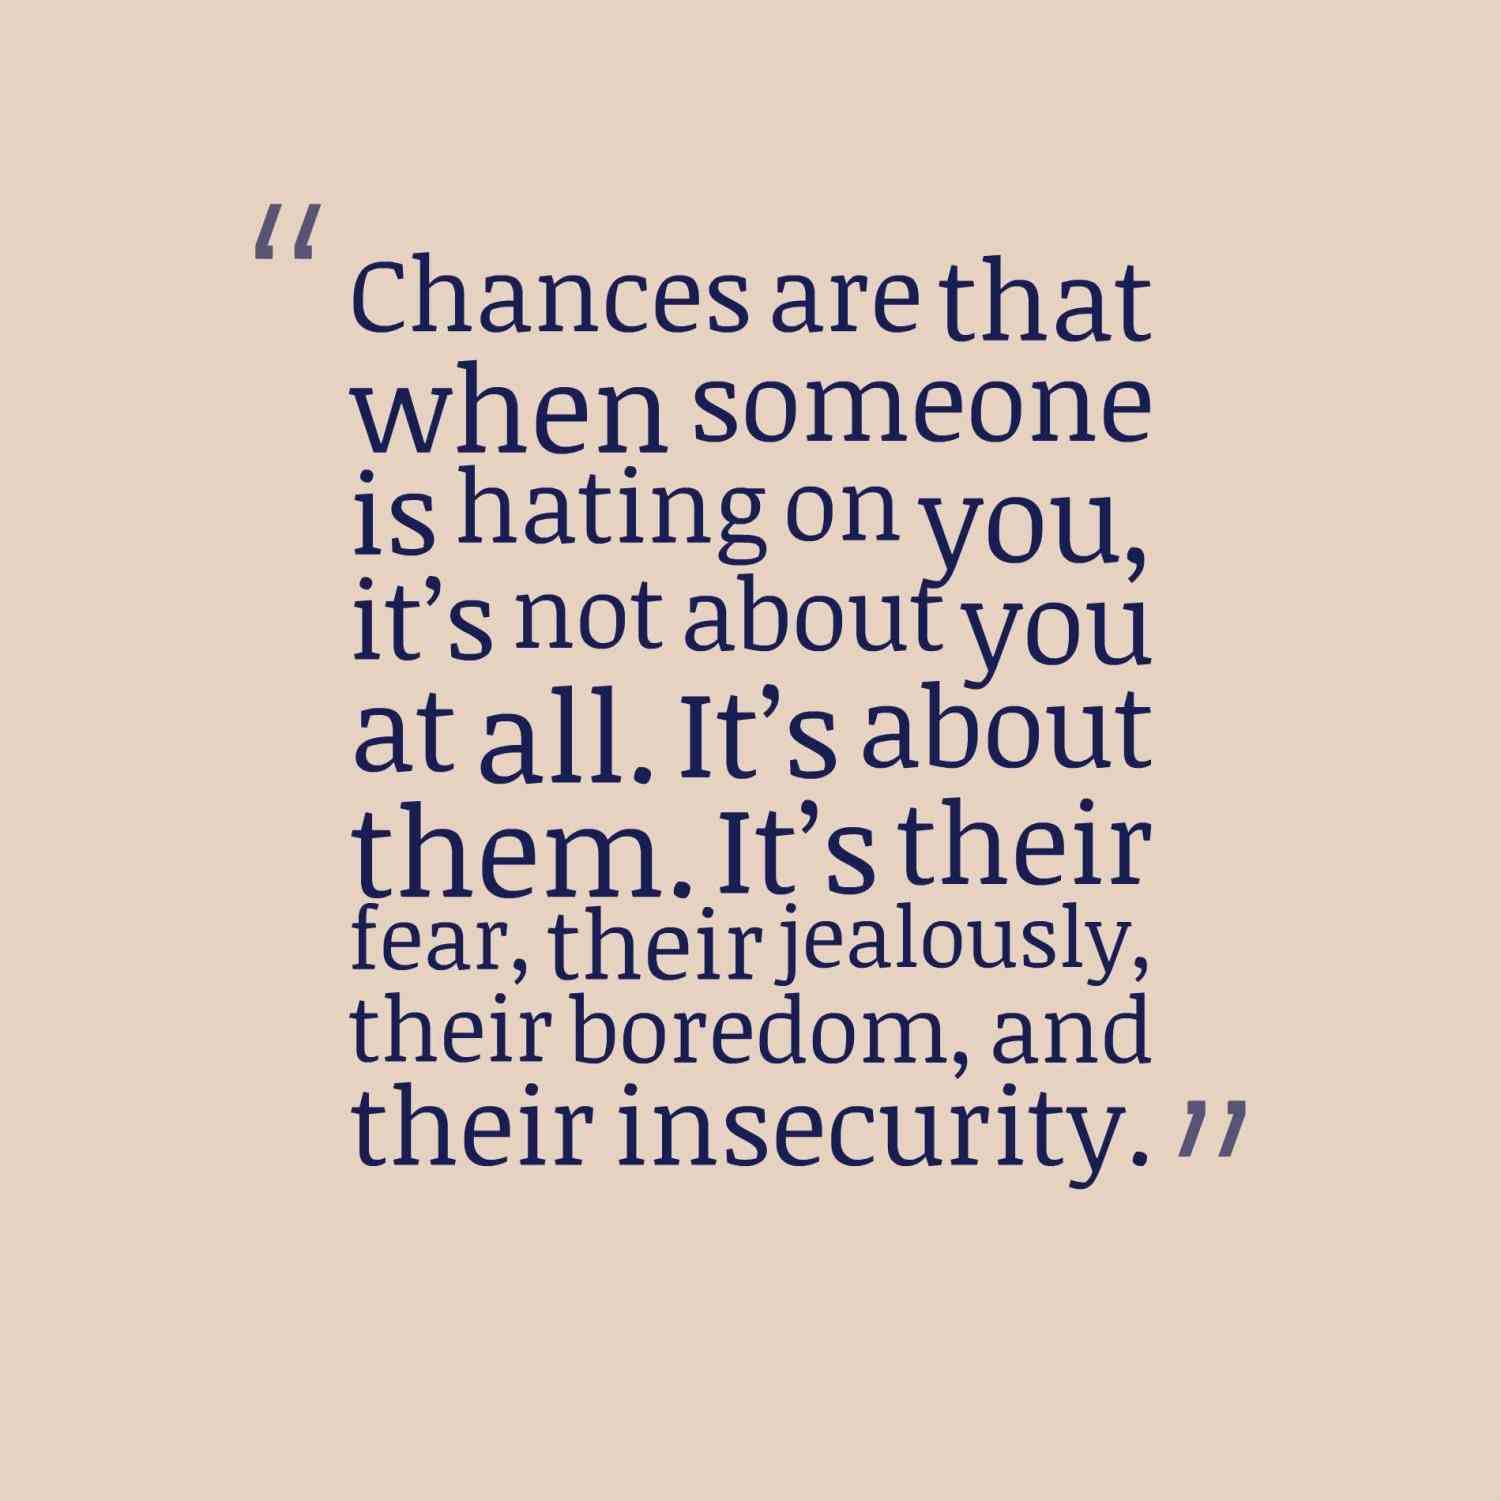 Chances are that when someone is hating on you, it’s not about you at all. It’s about them. It’s their fear, their jealously, their boredom, and their insecurity.